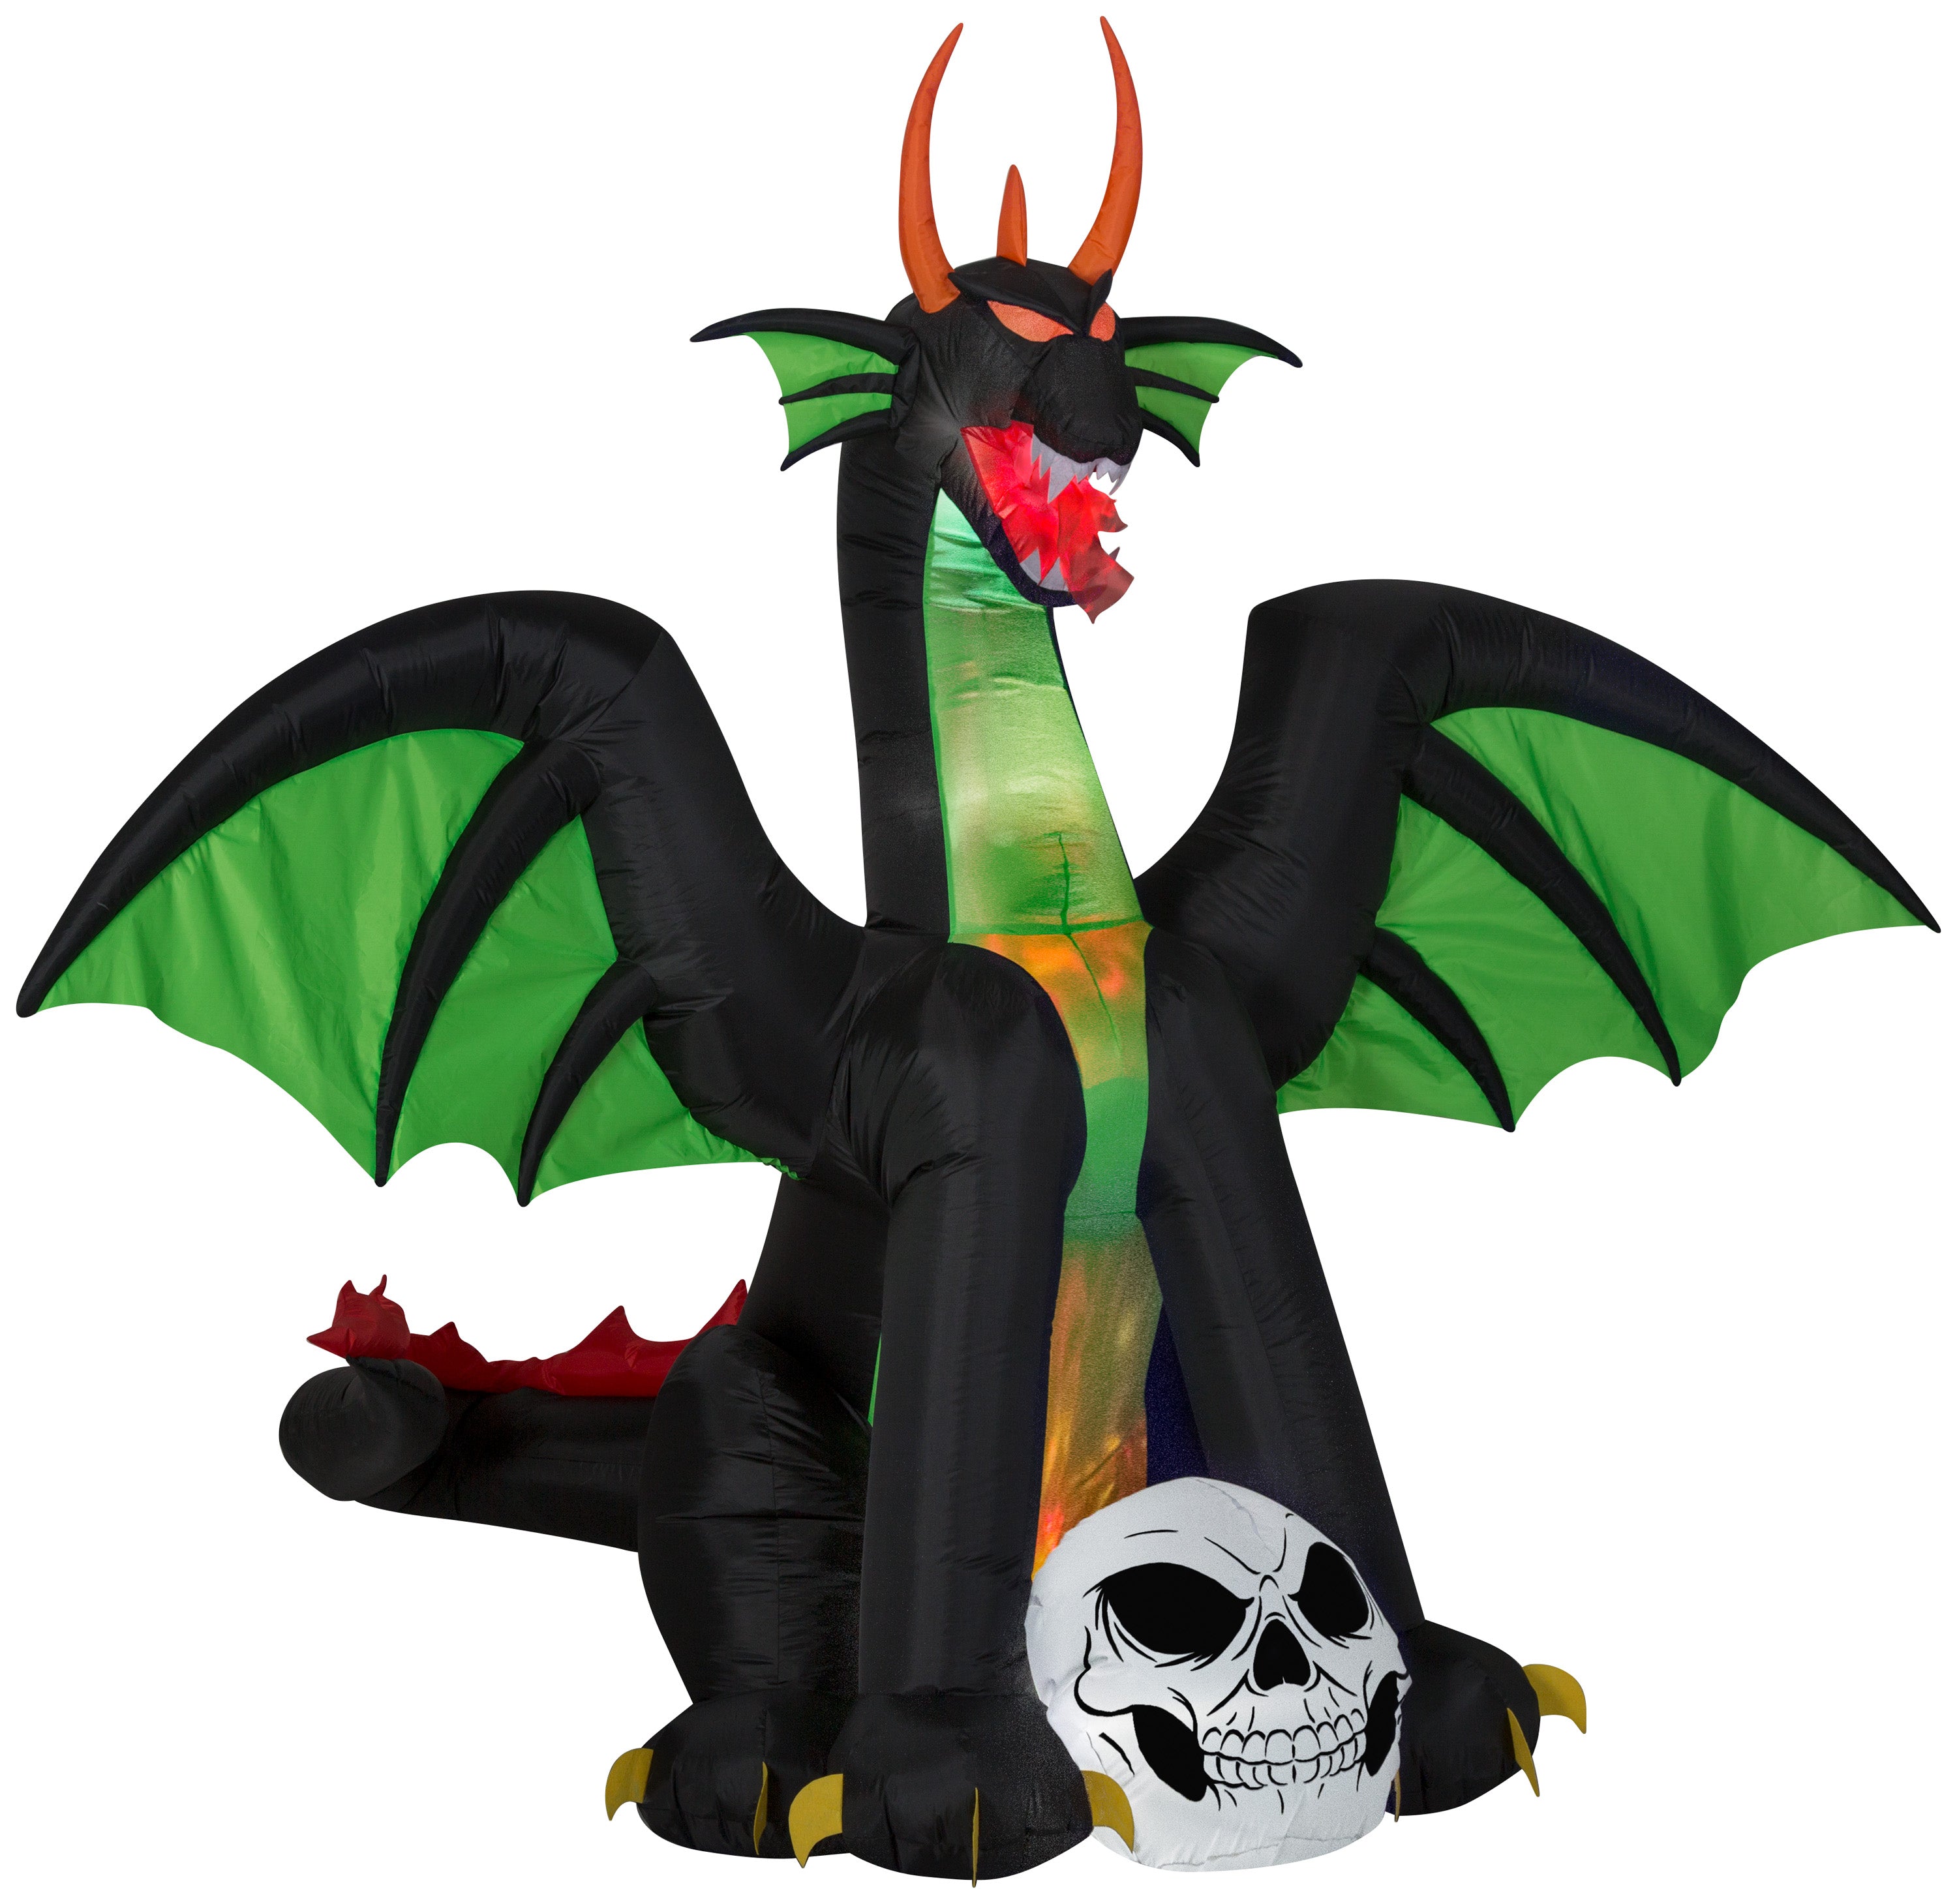 8' Projection Airblown Fire & Ice Dragon w/Wings and Flaming Mouth Halloween Inflatable